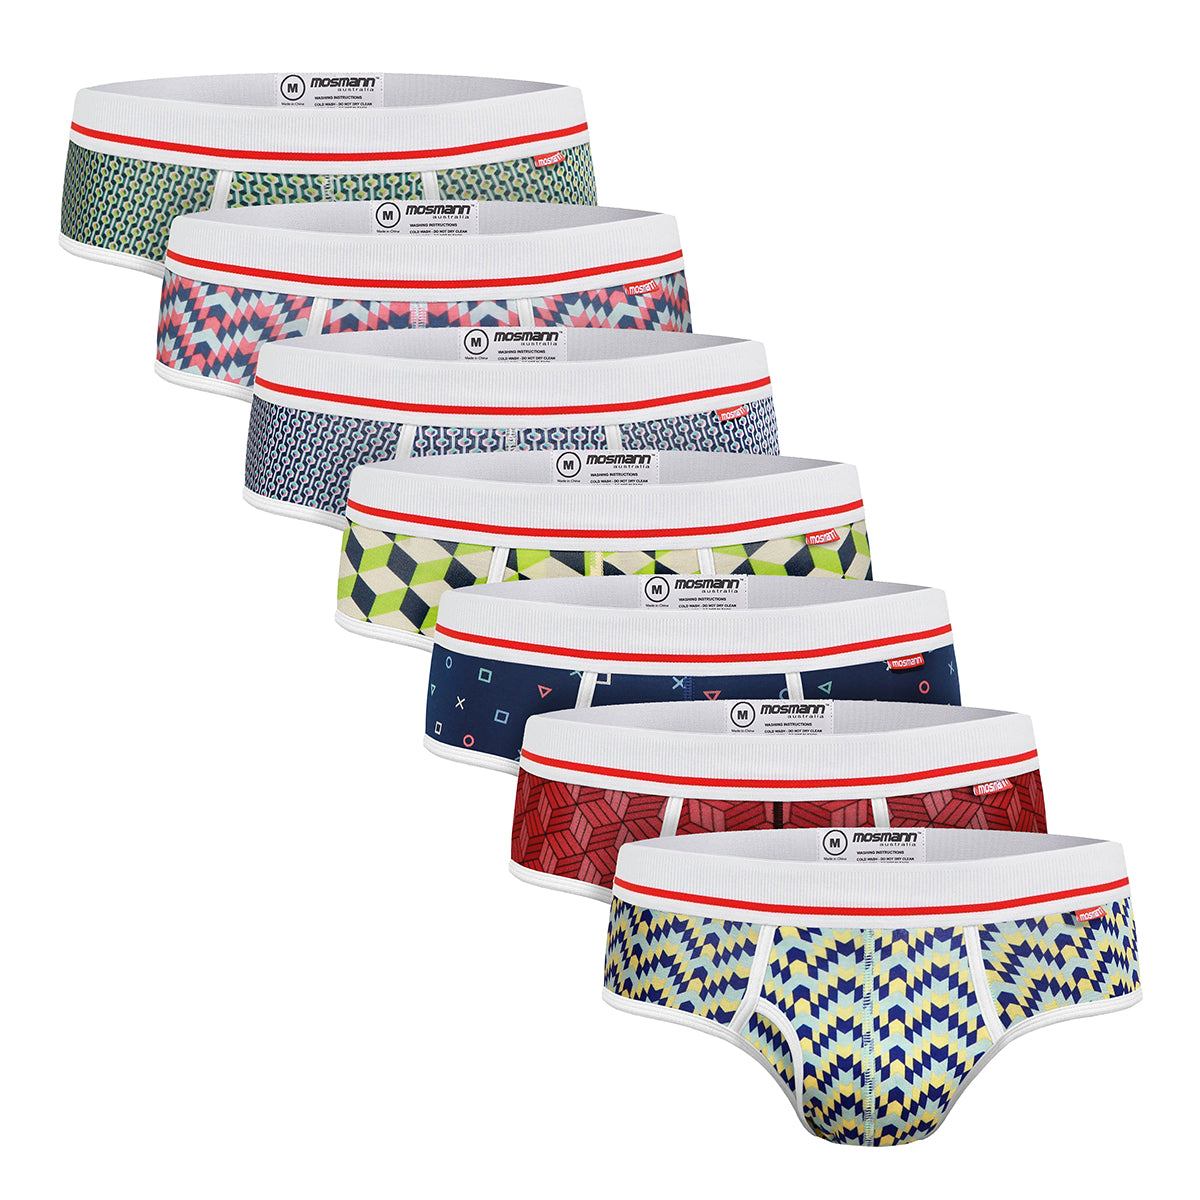 BAMBOO BRIEFS 7-PACK- ULYSSES